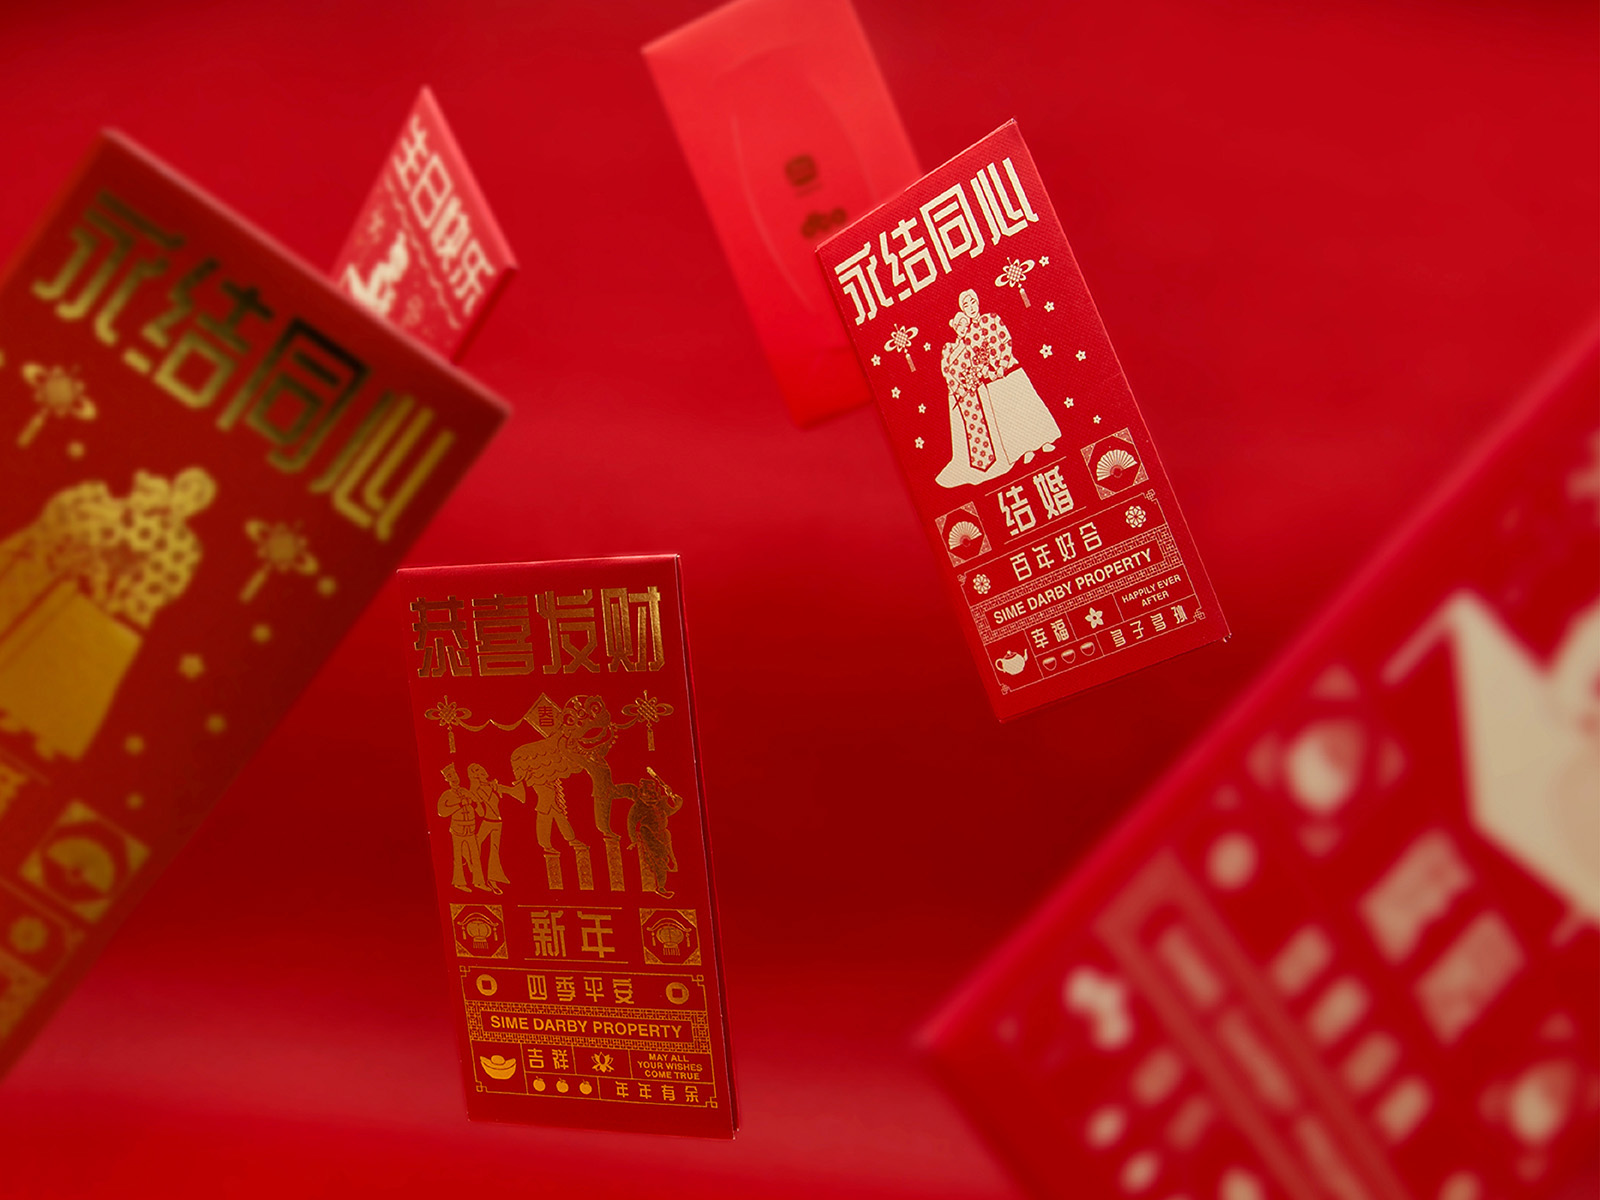 Sime Darby Chinese New Year 2020 red packet or ang pow with gold foiling printing, with product photography of falling red packet